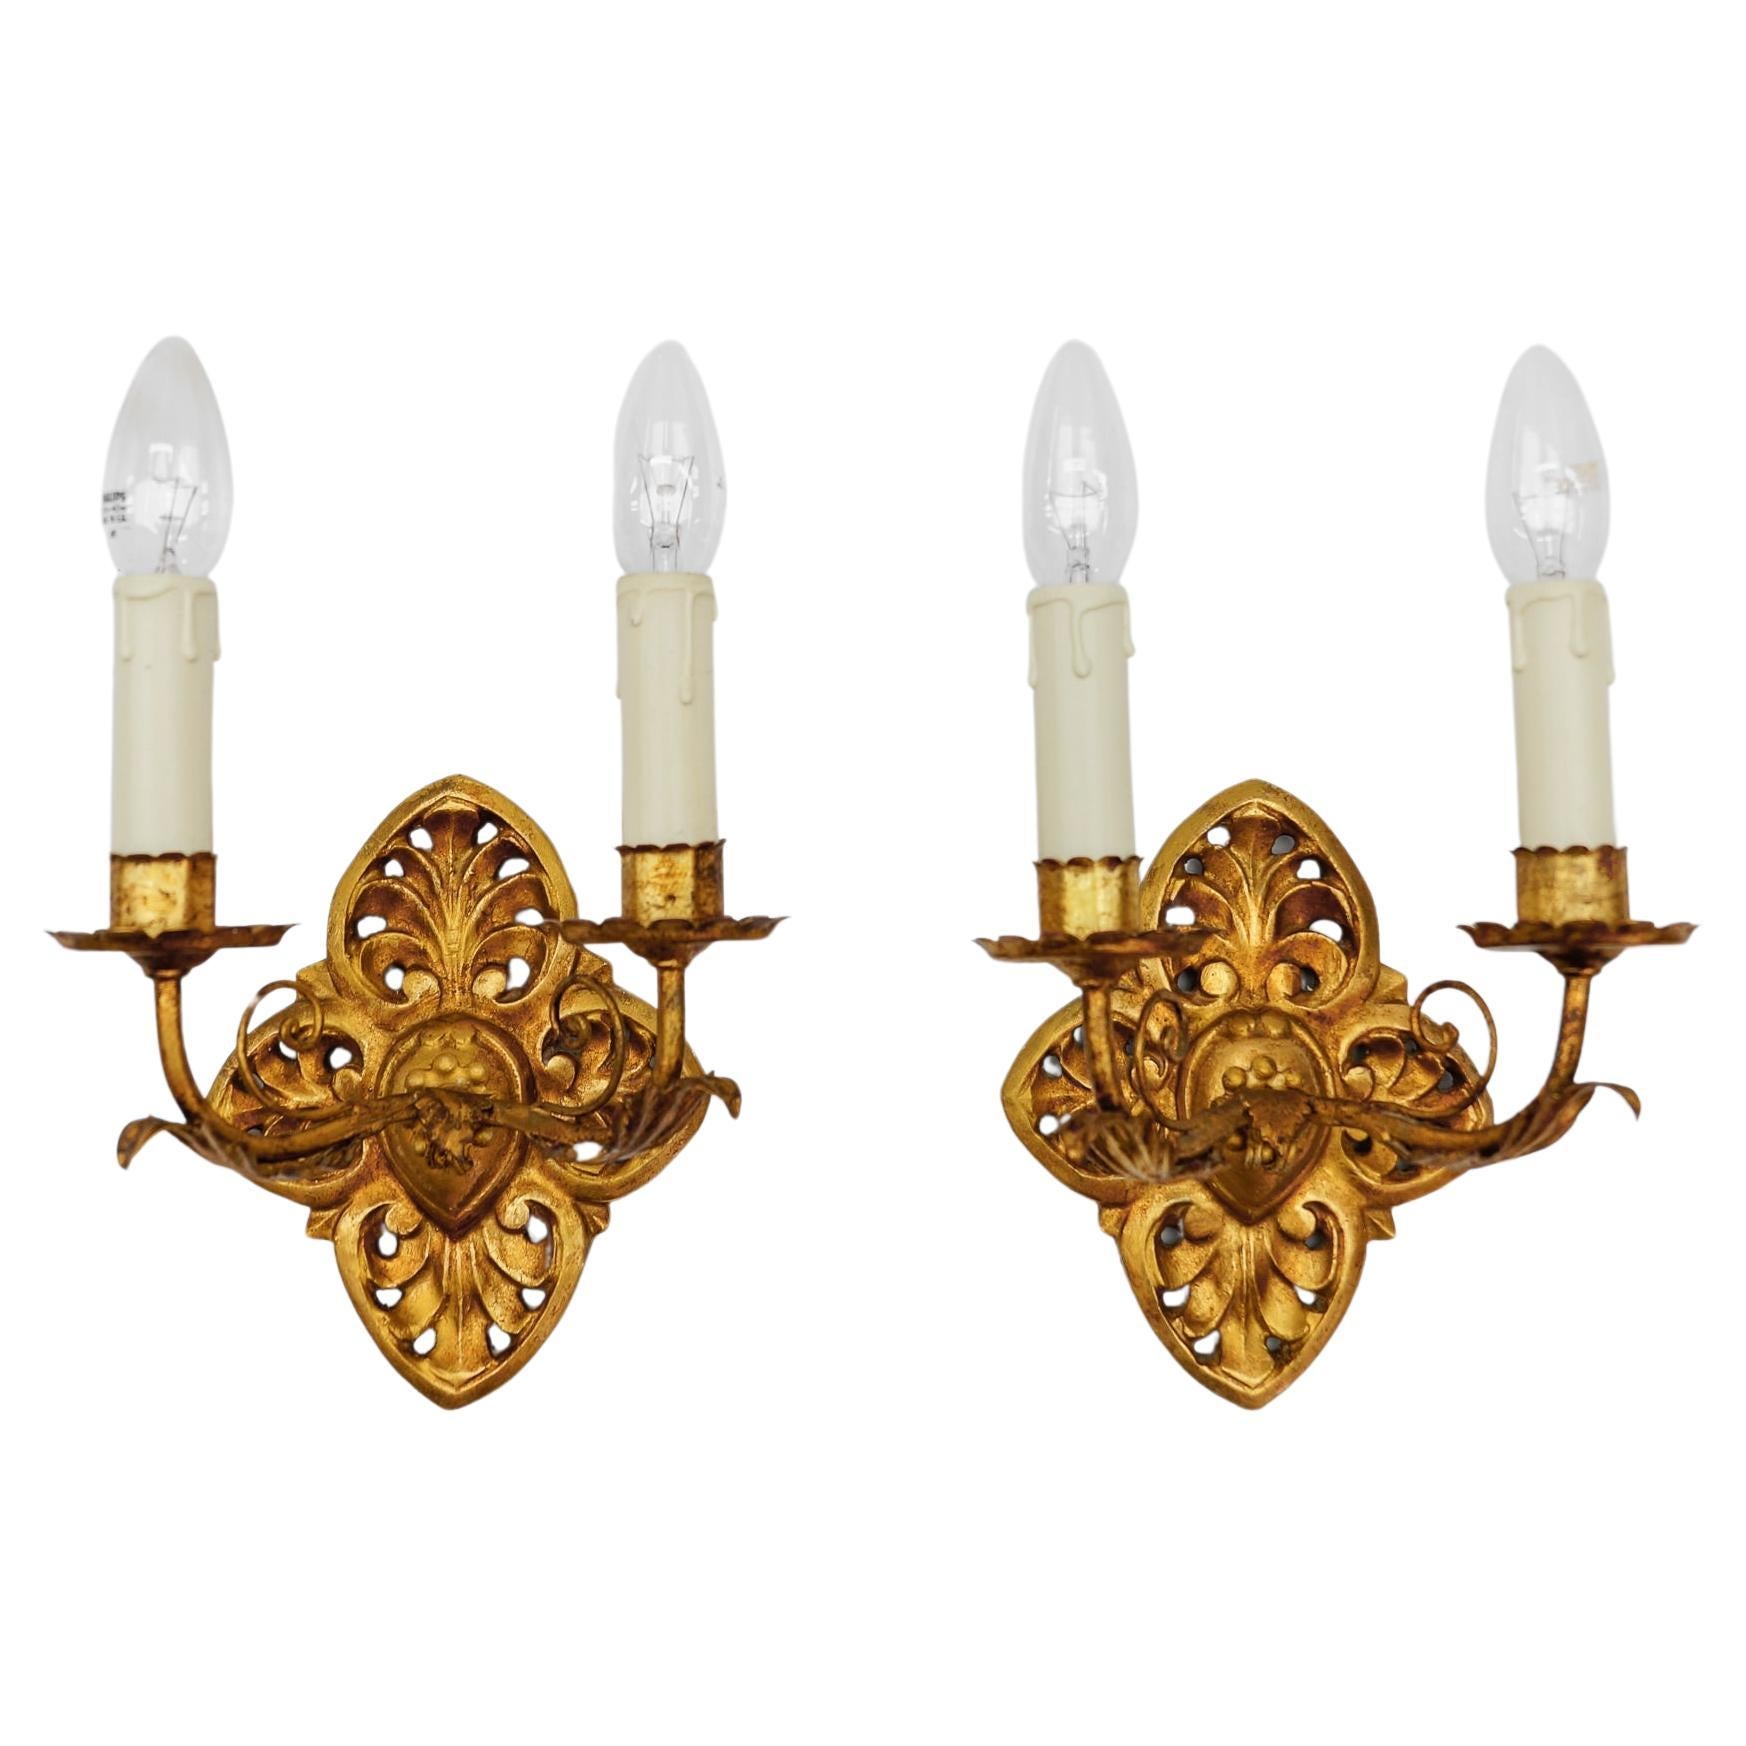 Pair of Hollywood Regency Double Wall Lights, Germany 1960s For Sale